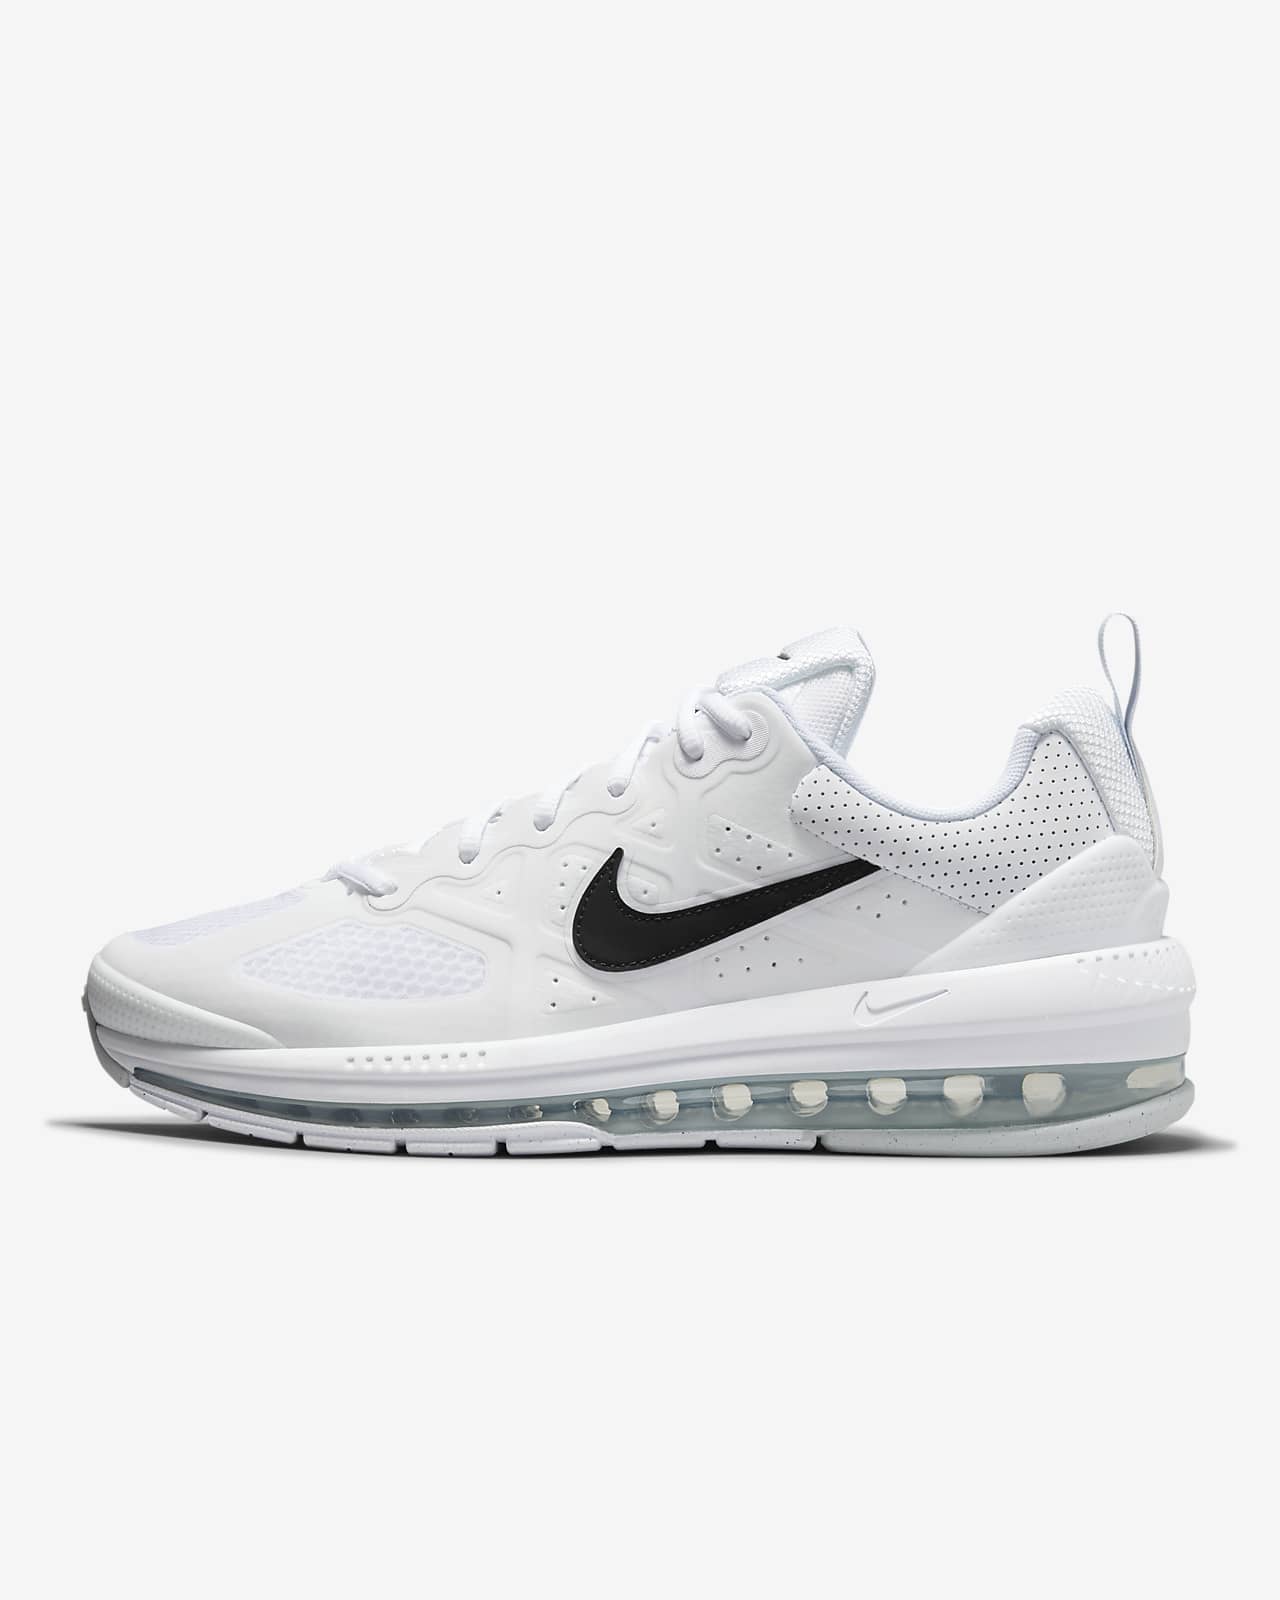 Chaussures Nike Air Max Genome pour Homme